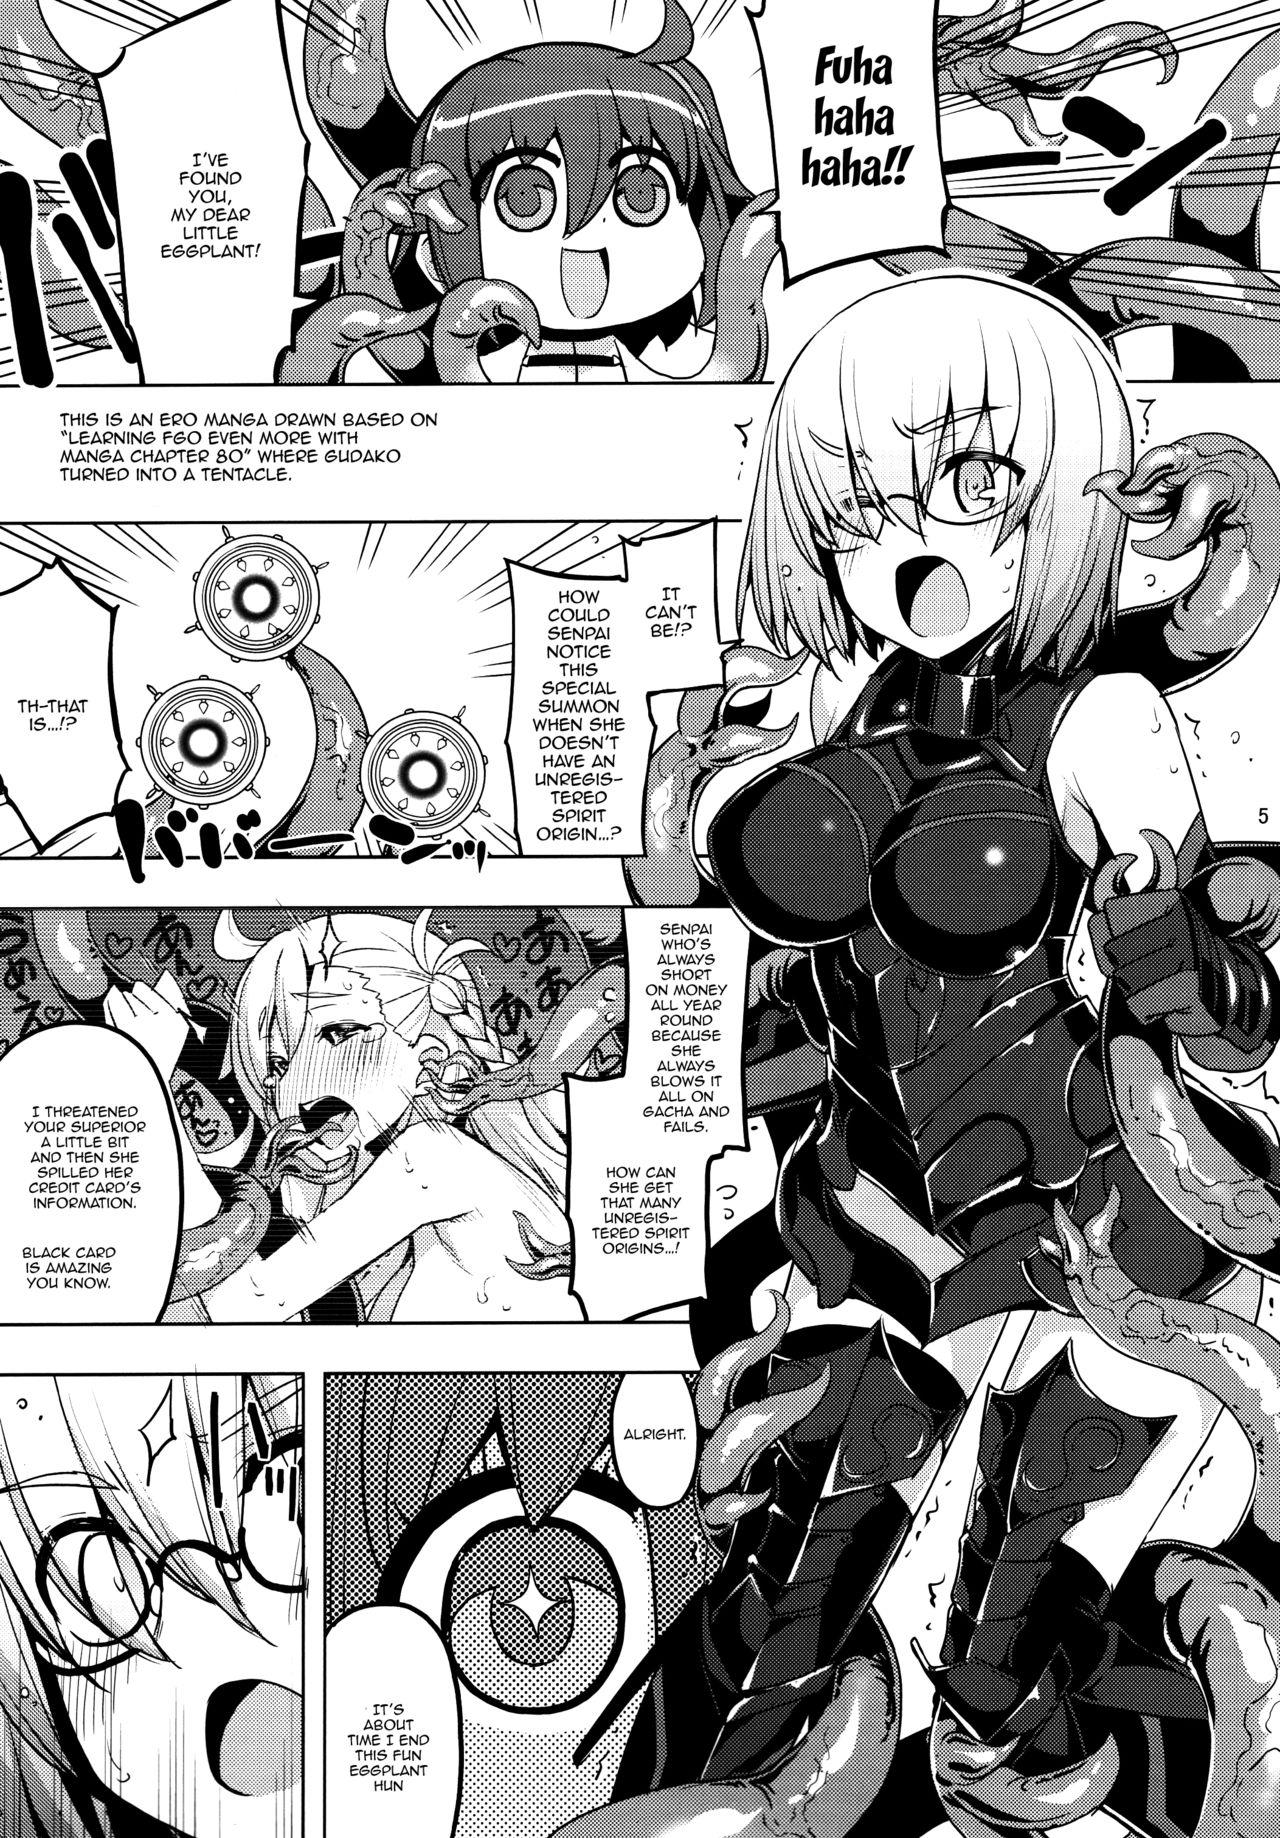 Ex Girlfriend RE25 - Fate grand order Dicks - Page 3